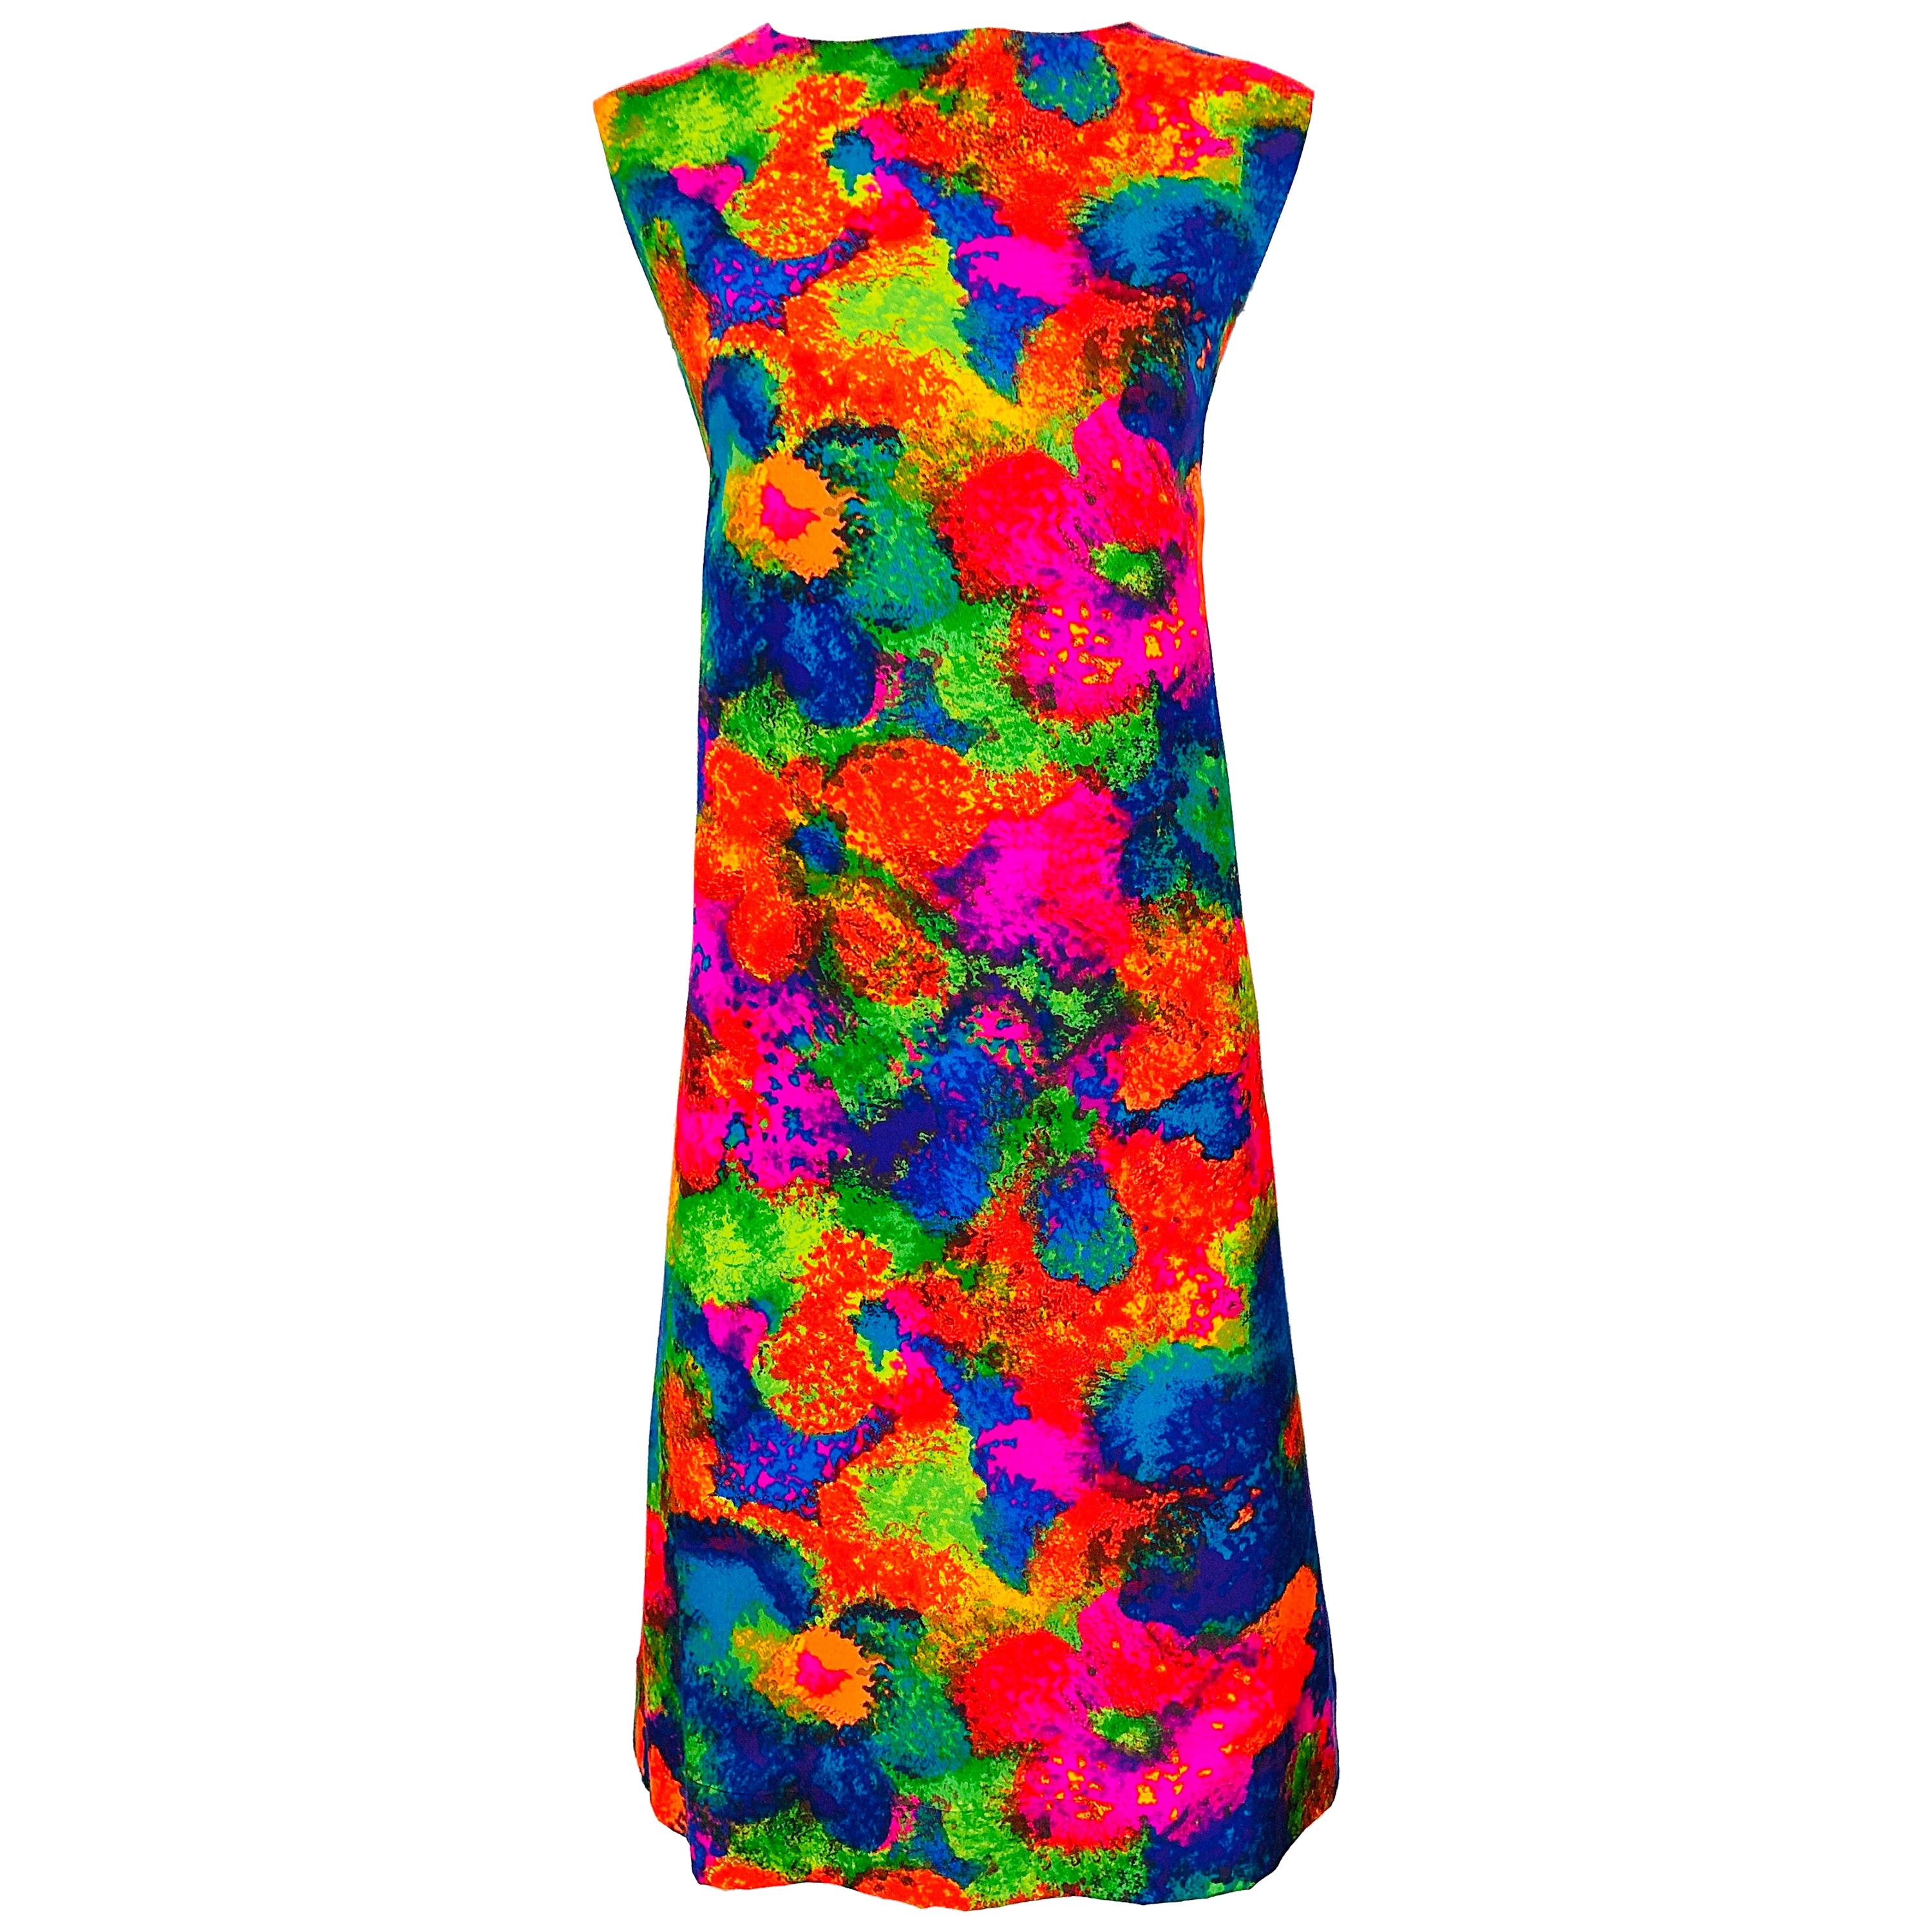 Chic 1960s Larger Size Neon Abstract Flower Print Vintage 60s Cotton Shift Dress For Sale